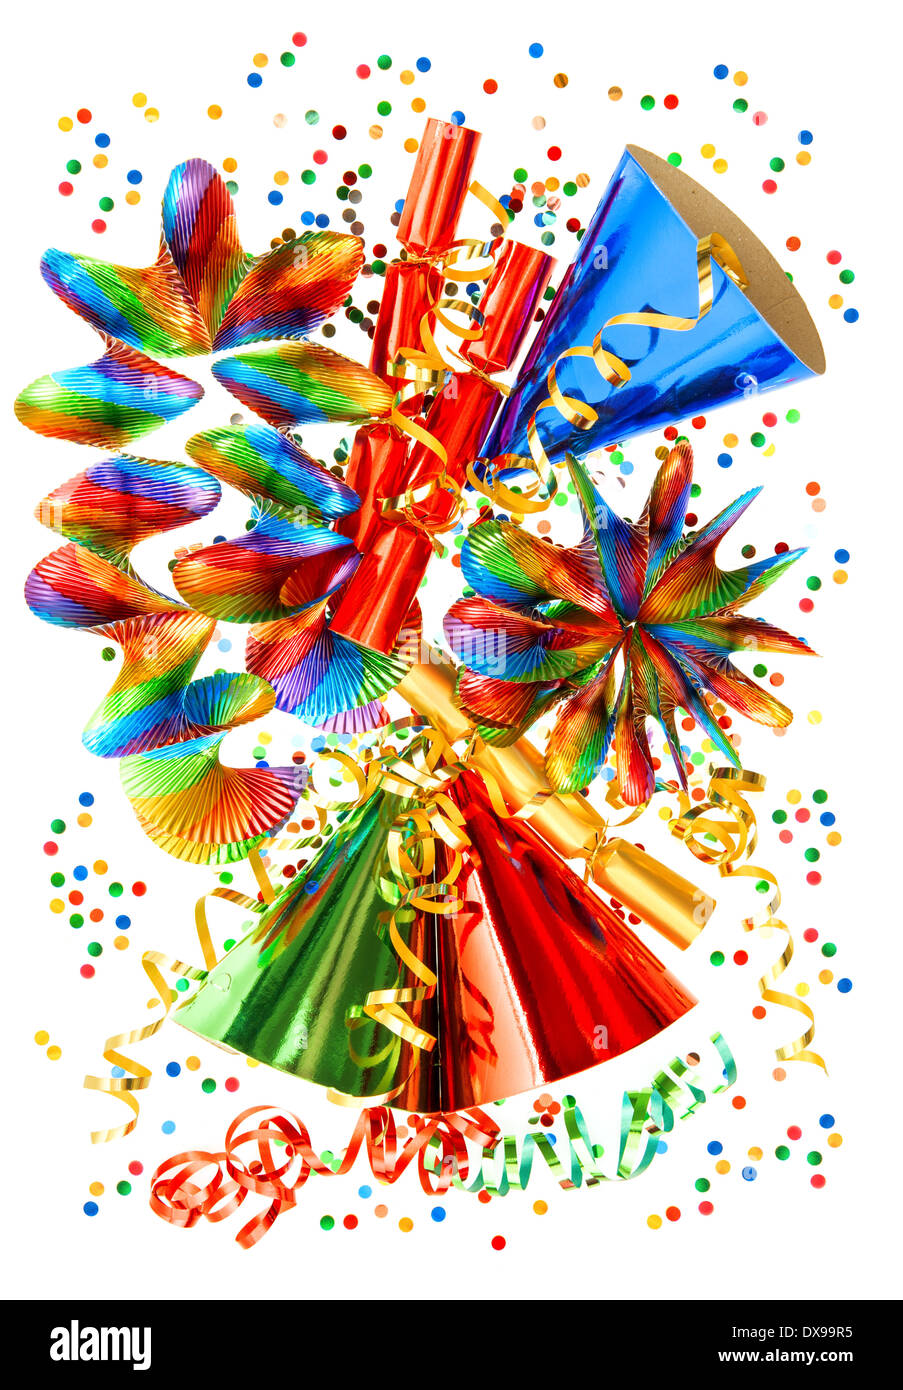 colorful background with garlands, streamer, cracker, party hats and confetti. festive carnival, new year or birthday decoration Stock Photo